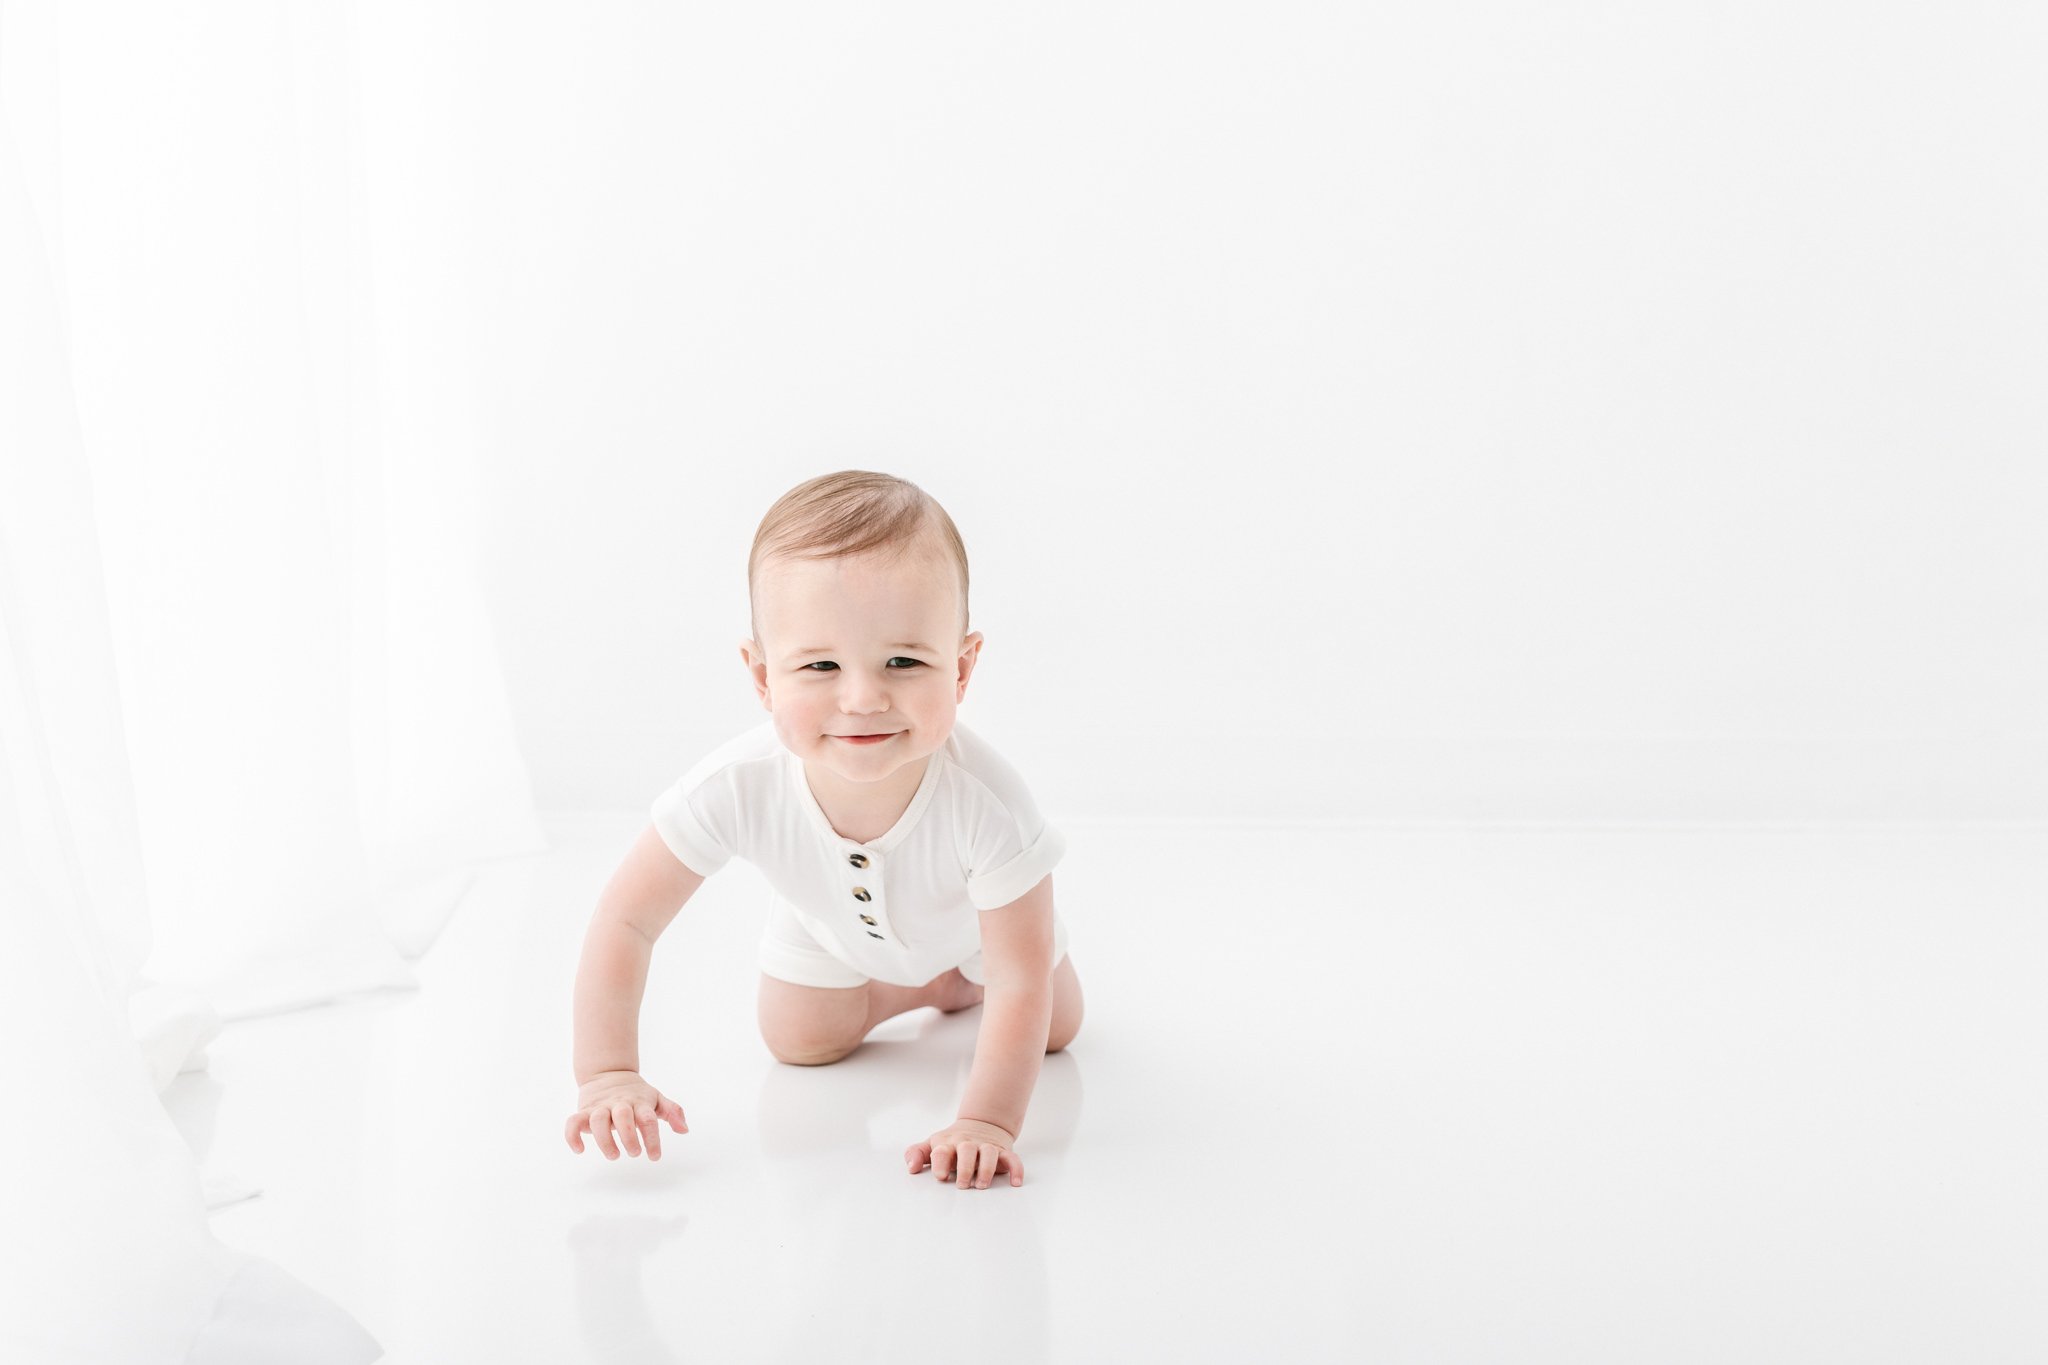  White studio portrait of a one-year-old baby boy by Nicole Hawkins Photography. white outfits for baby boy boy crawling #NicoleHawkinsPhotography #NicoleHawkinsBabies #FirstBirthdayPhotography #StudioFamilyPortraits #NJBabies #FirstBirthday #StudioB